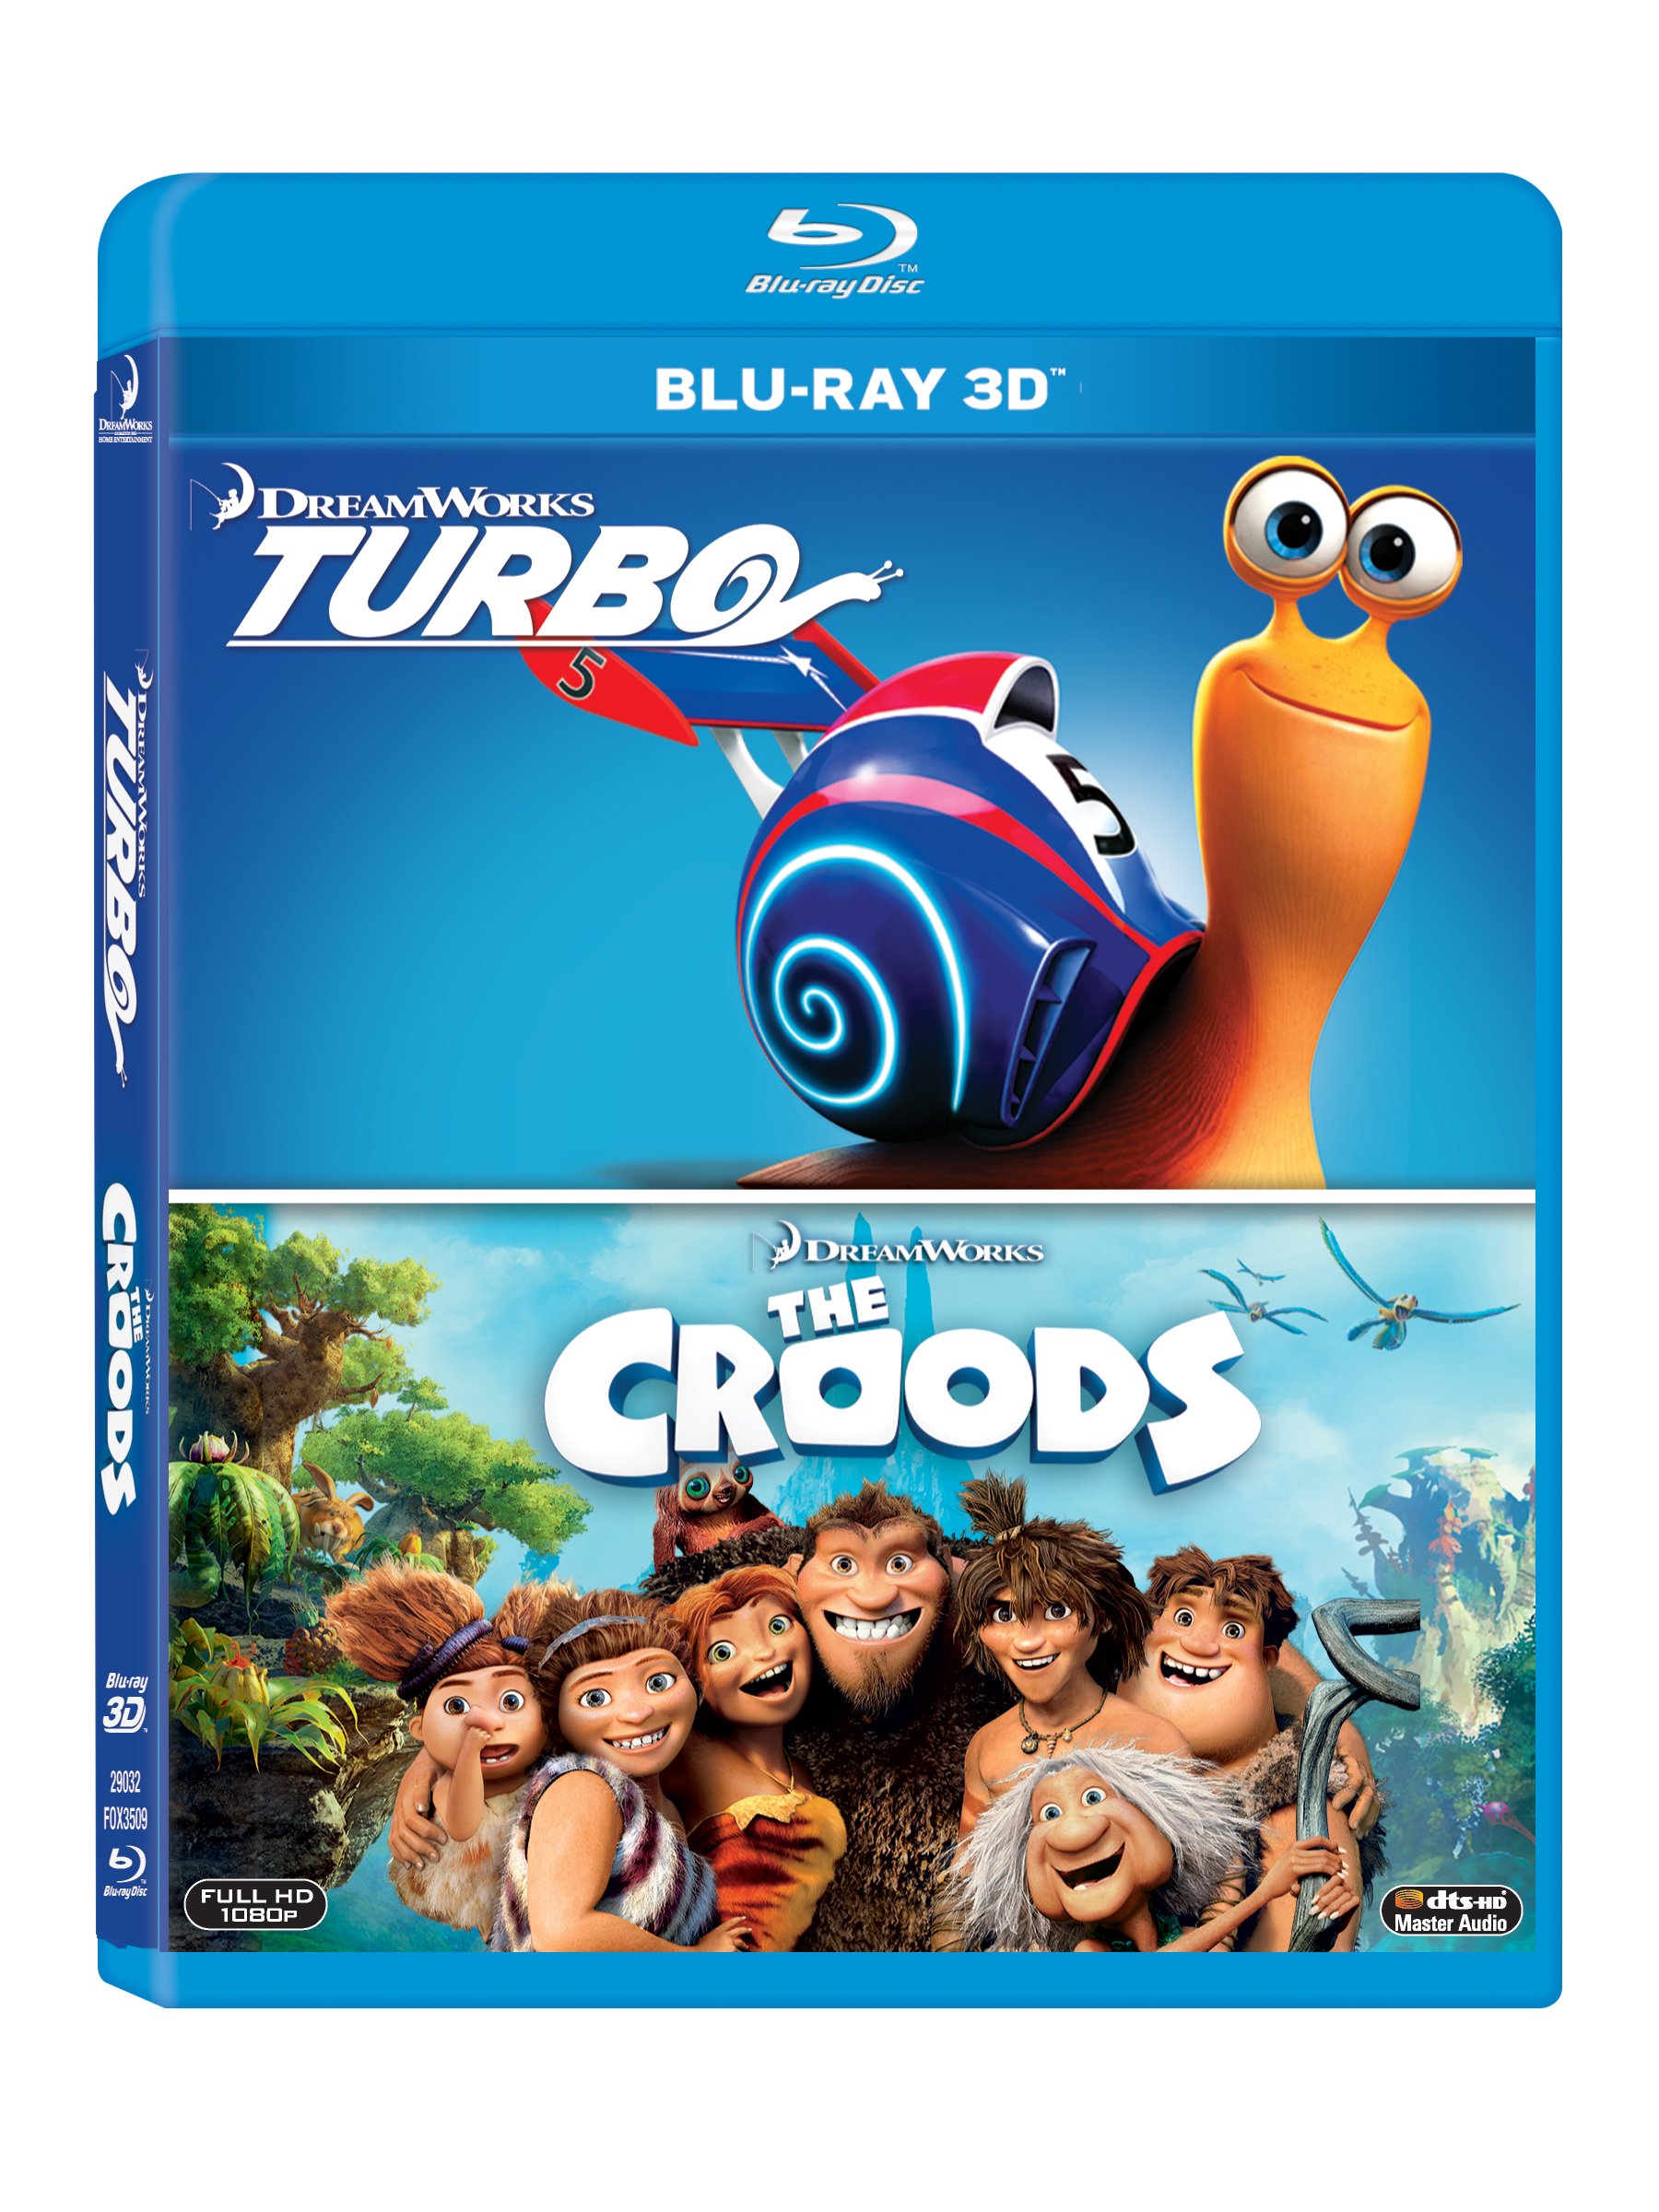 2-animation-movies-collection-turbo-blu-ray-3d-the-croods-blu-ray-3d